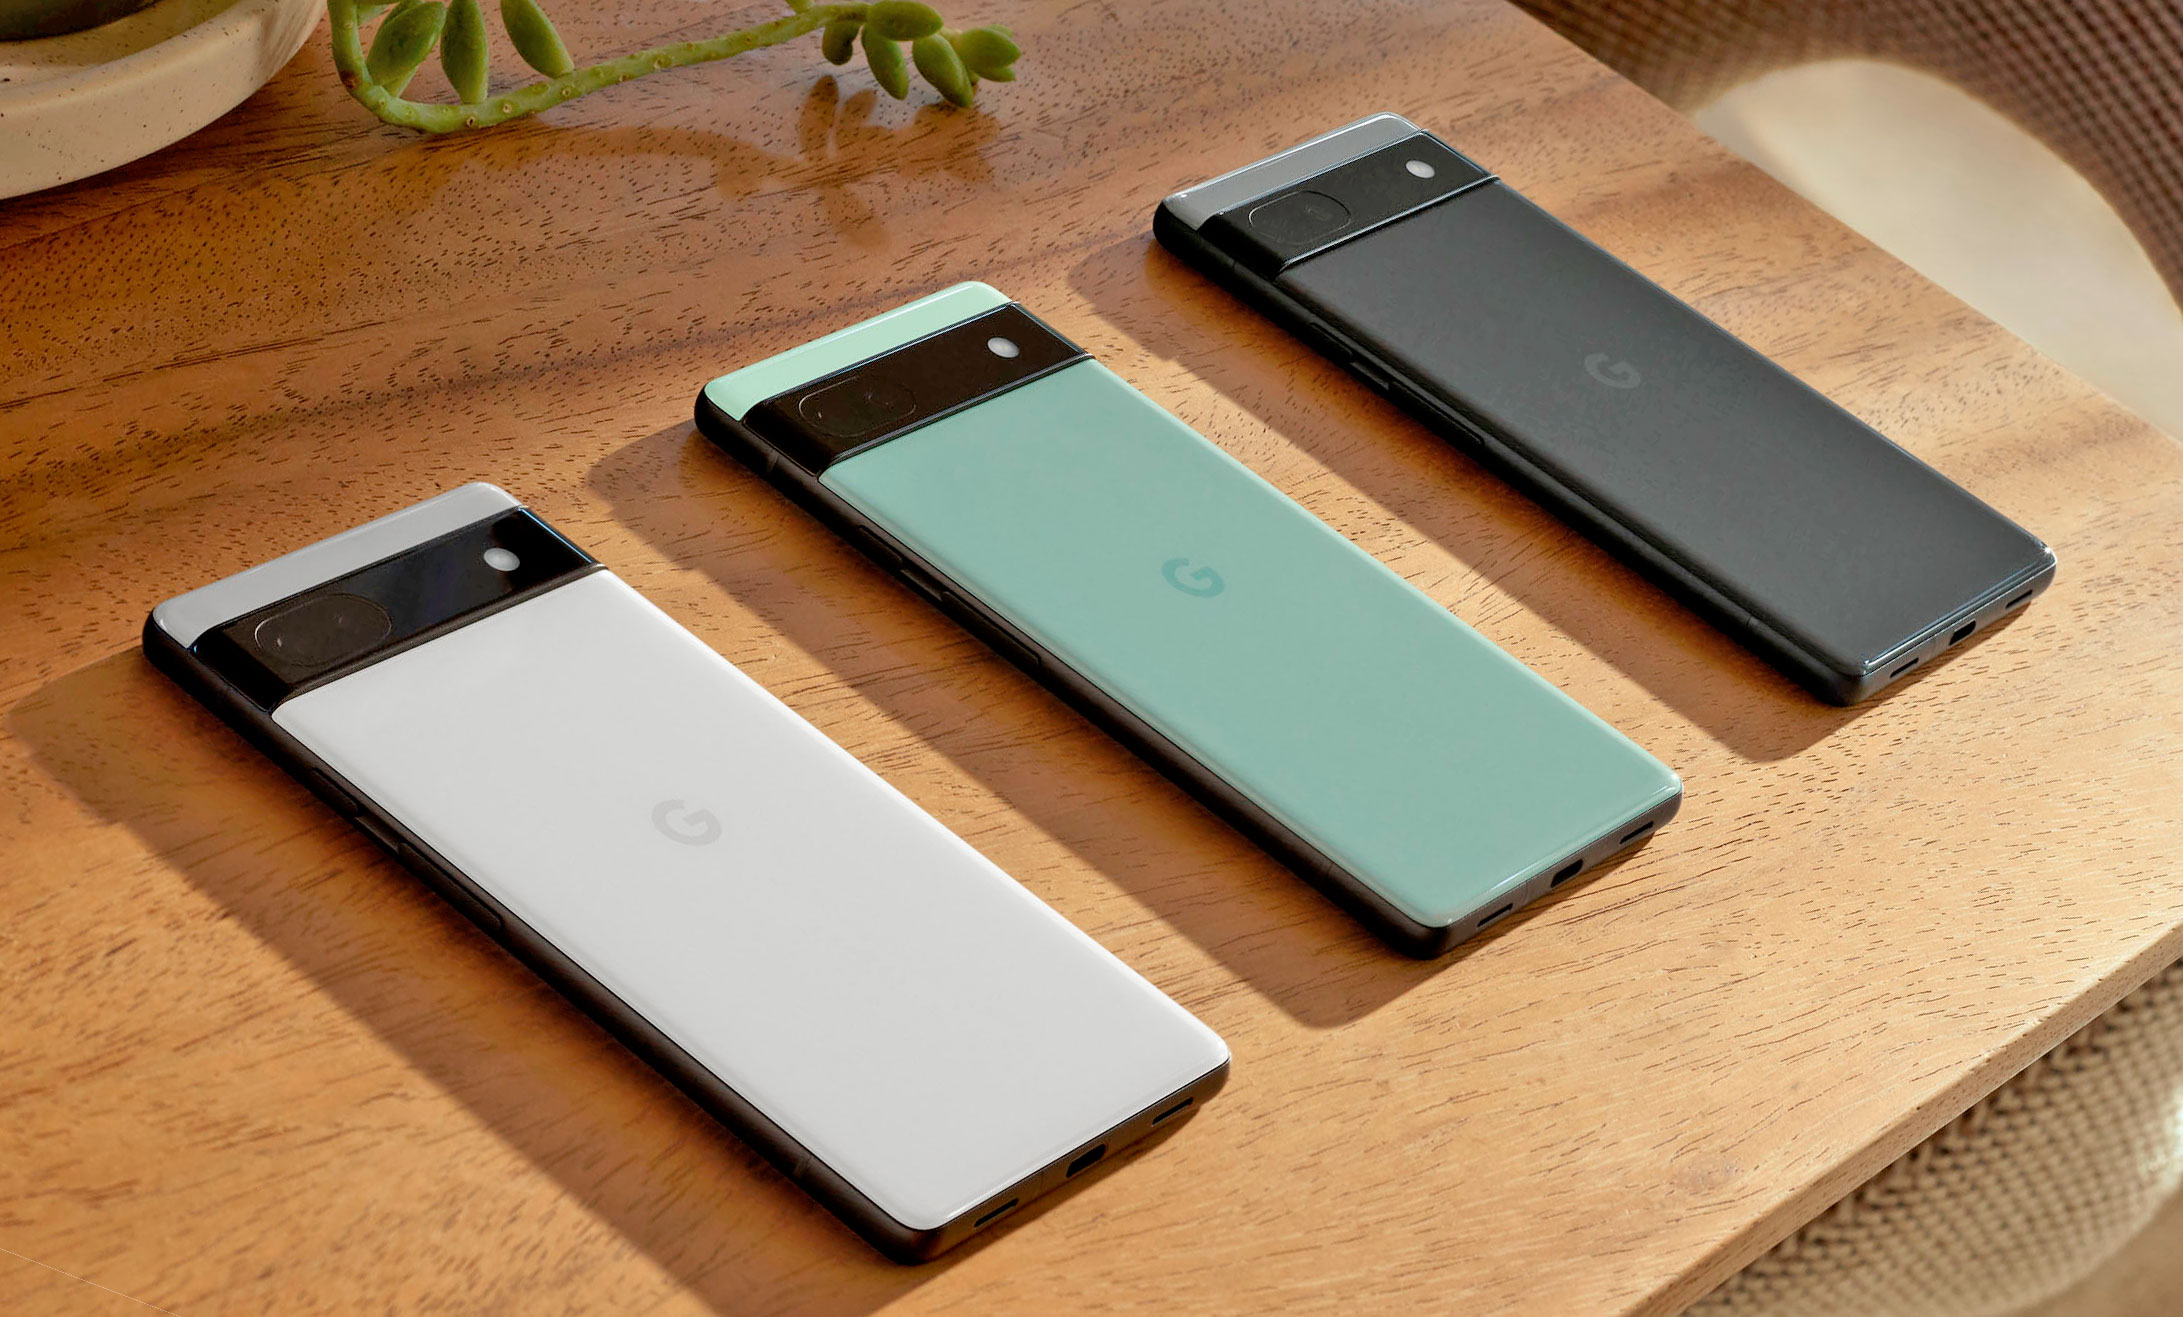 Google Pixel 6a listed on Best Buy’s website ahead of release